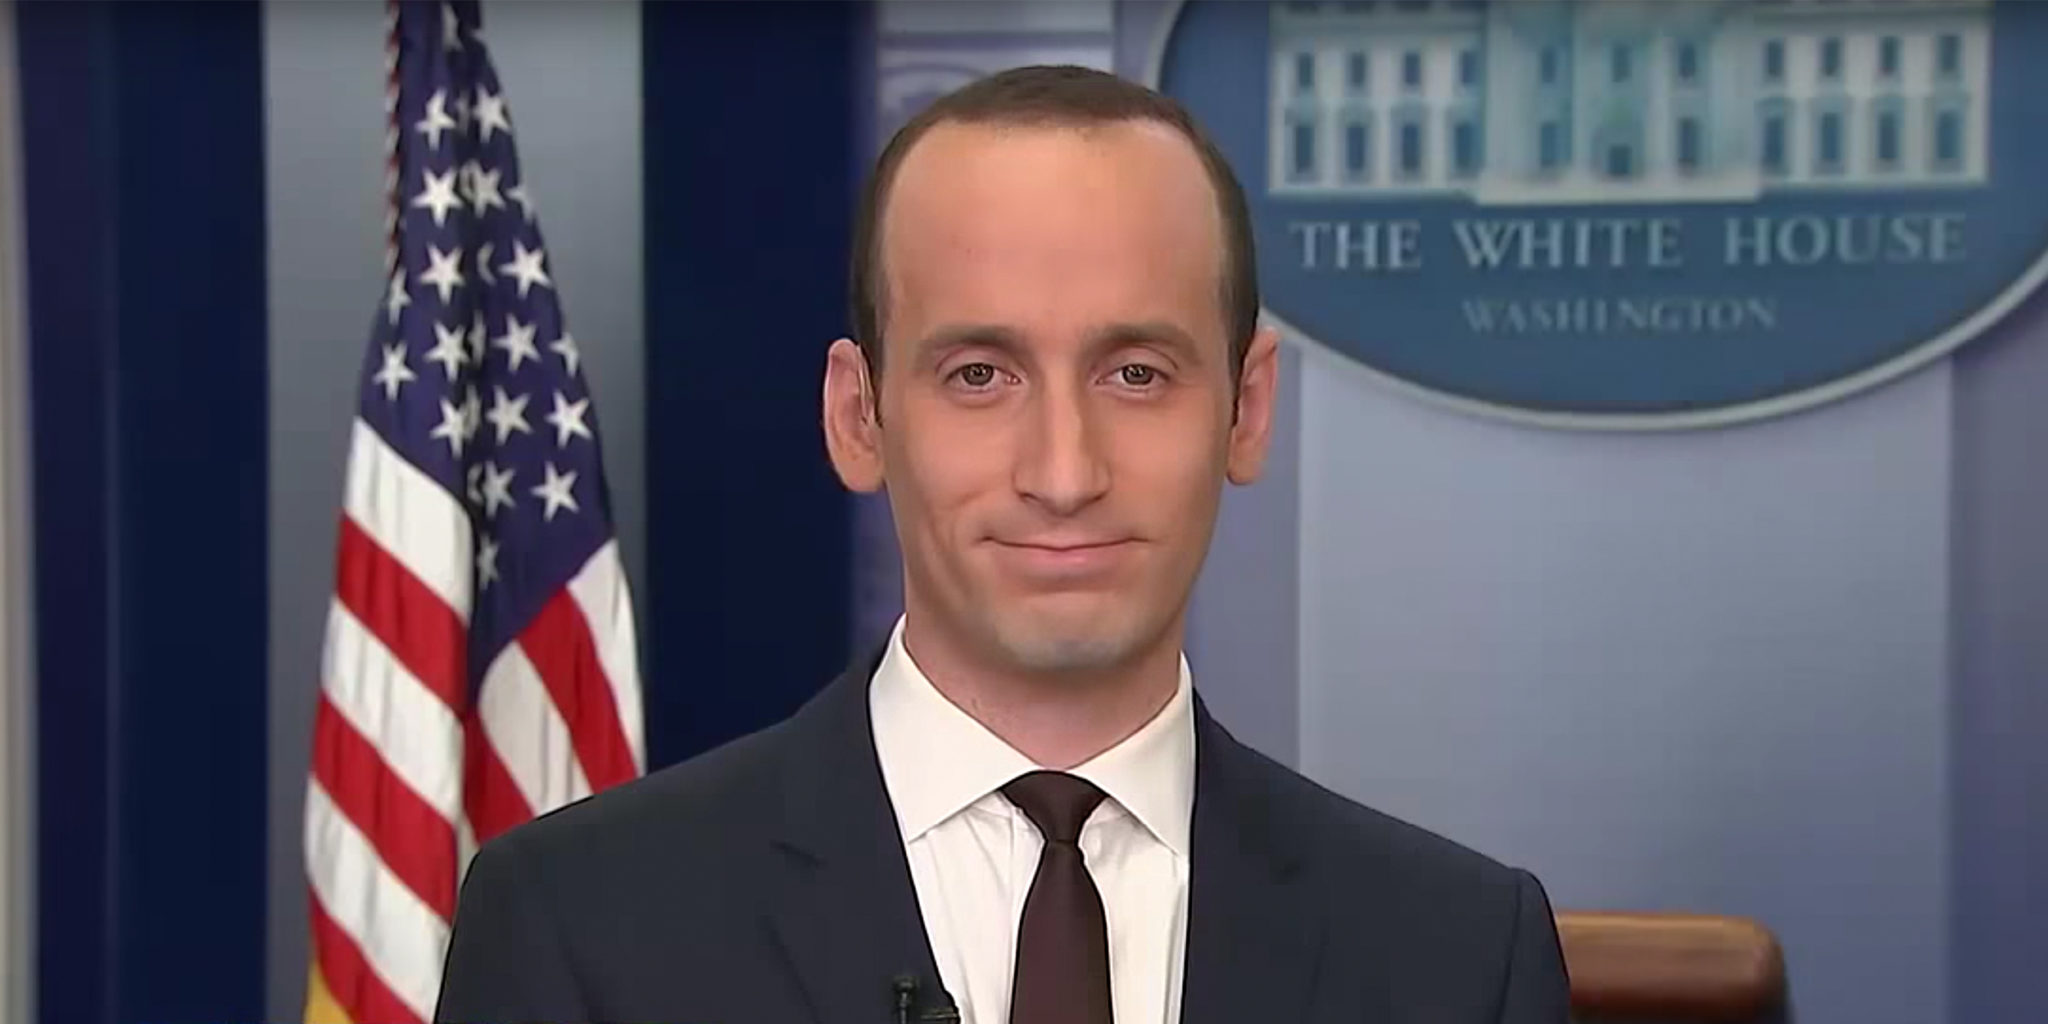 Stephen Miller is Not a White Nationalist